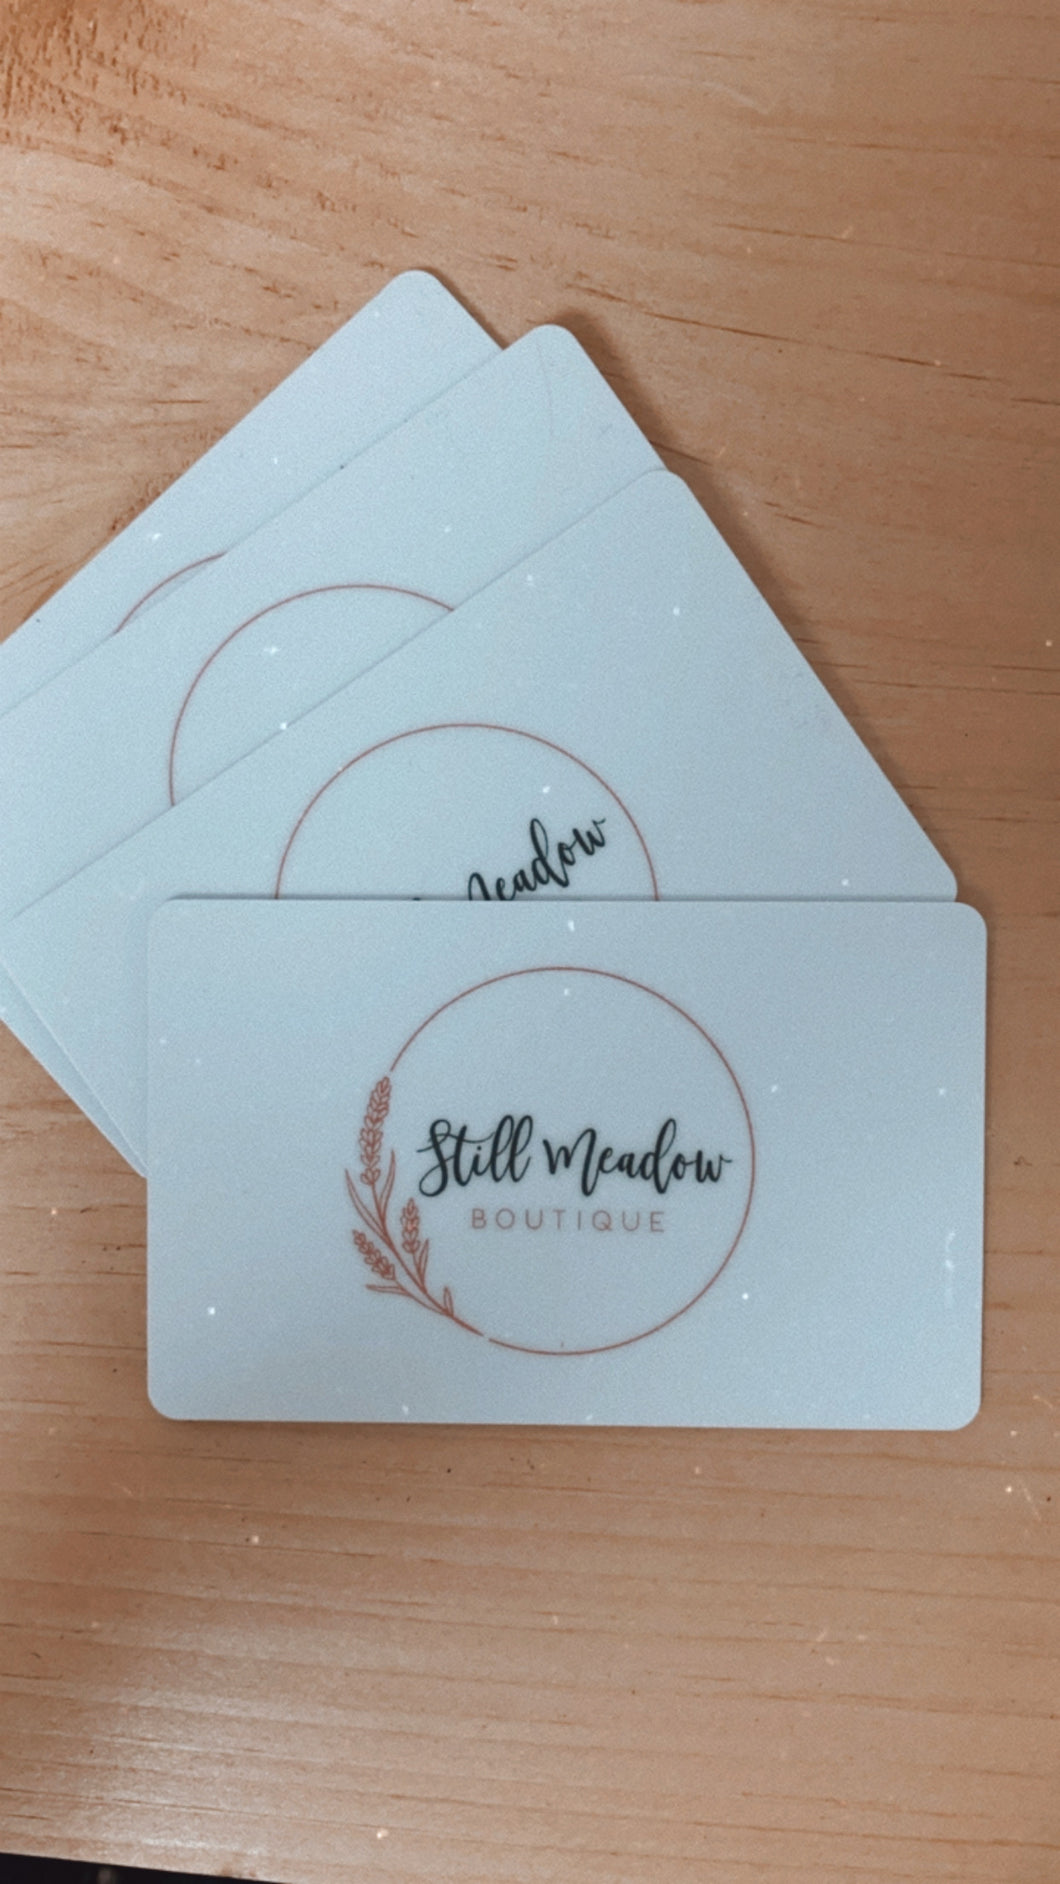 Still Meadow Boutique gift card